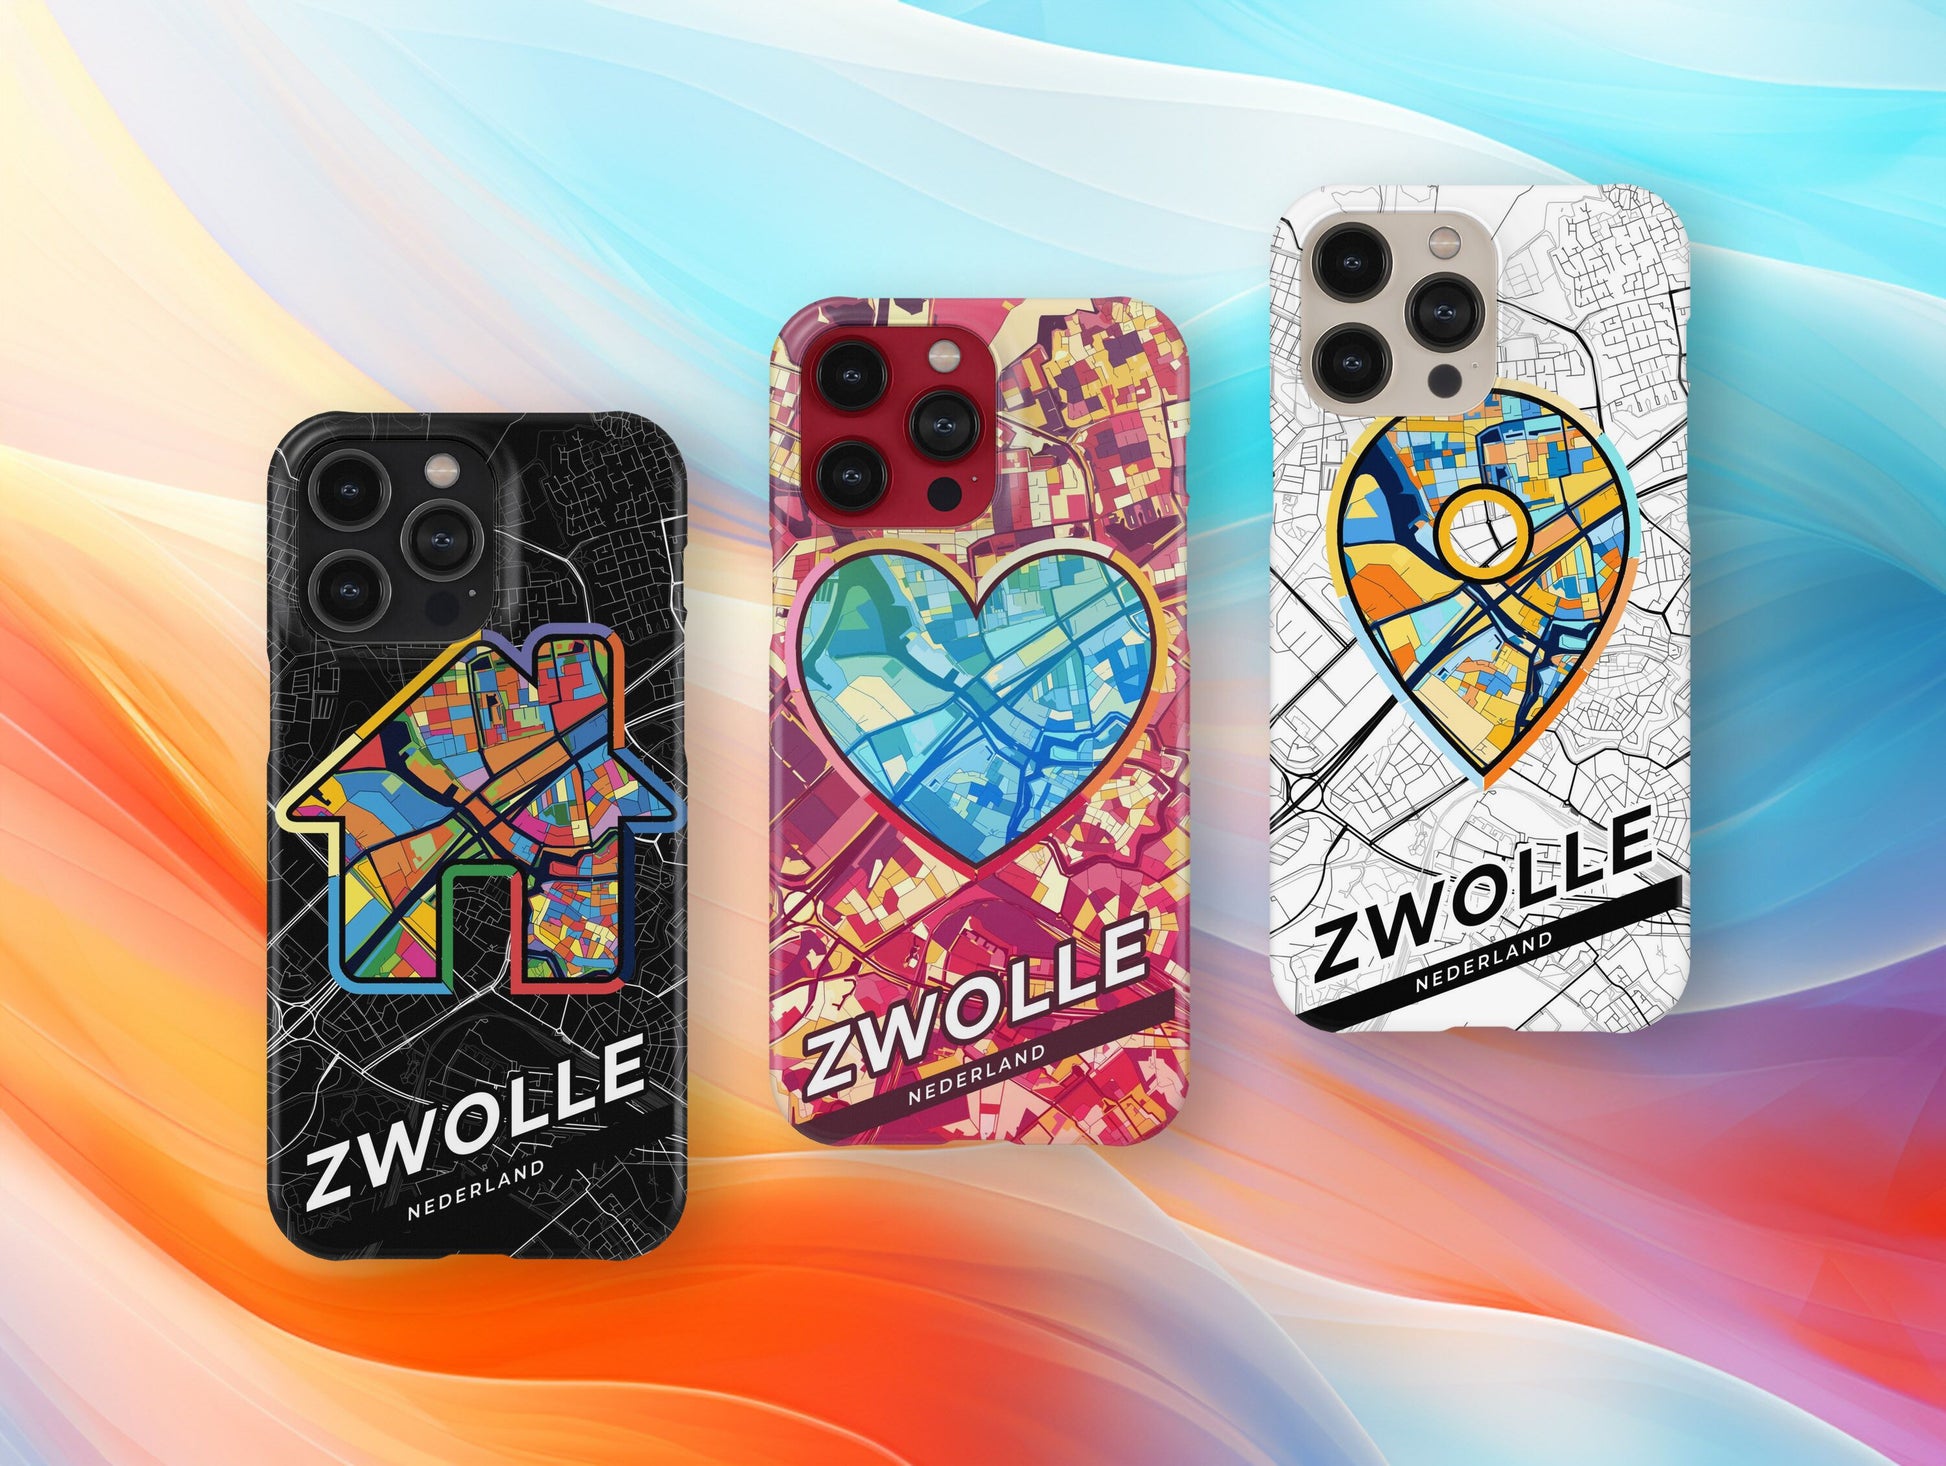 Zwolle Netherlands slim phone case with colorful icon